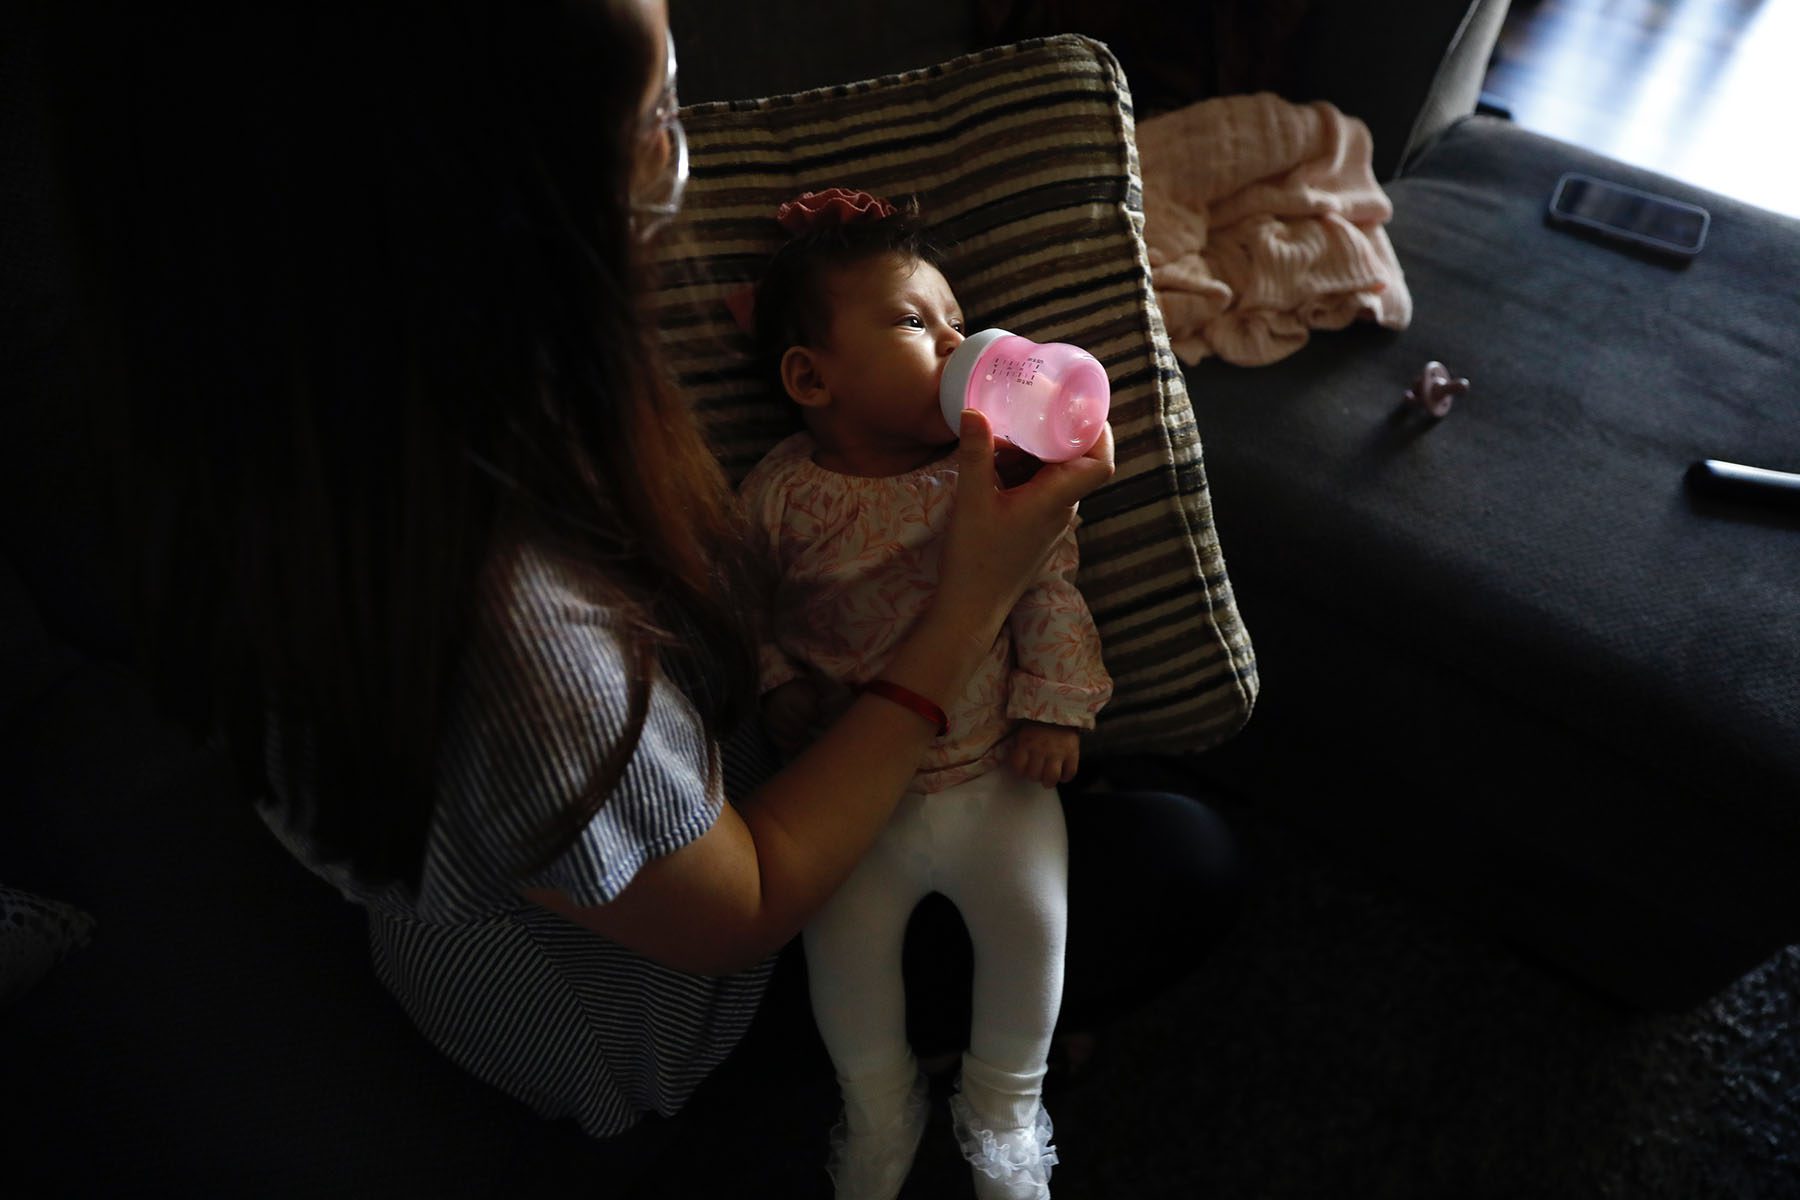 A mother feeds her three month old daughter at home in Los Angeles.